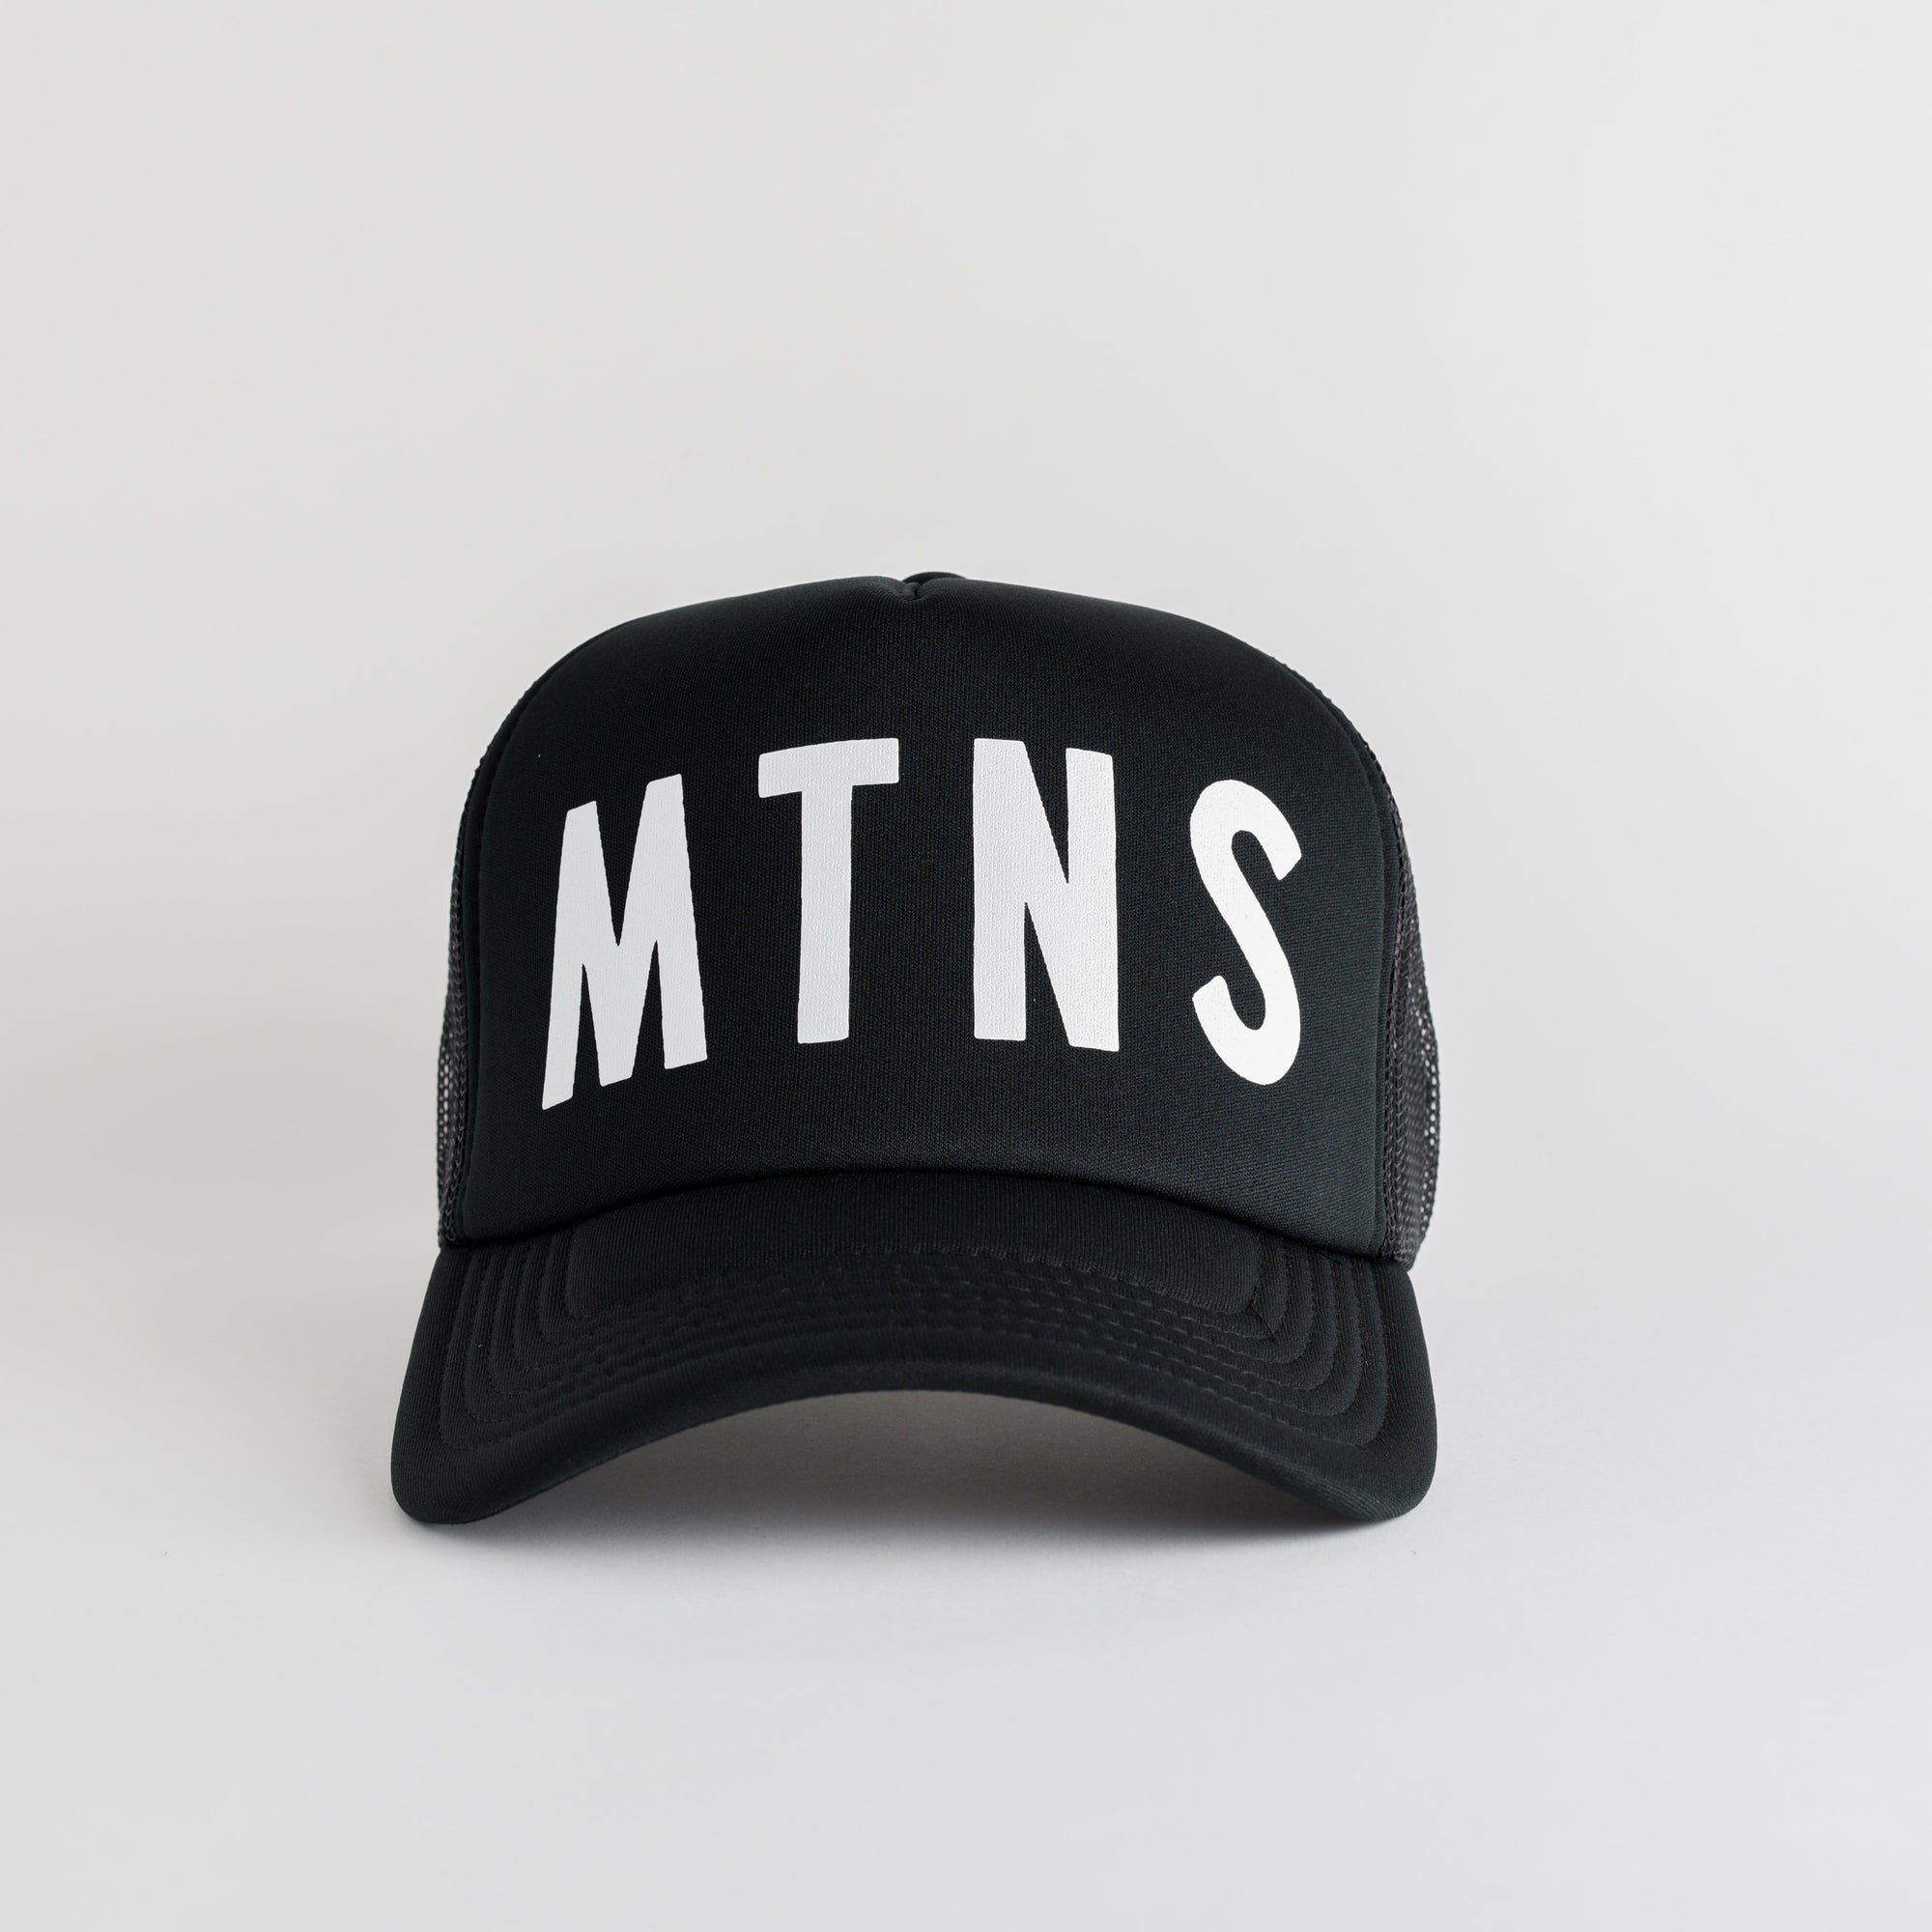 MTNS Recycled Trucker Hat - black